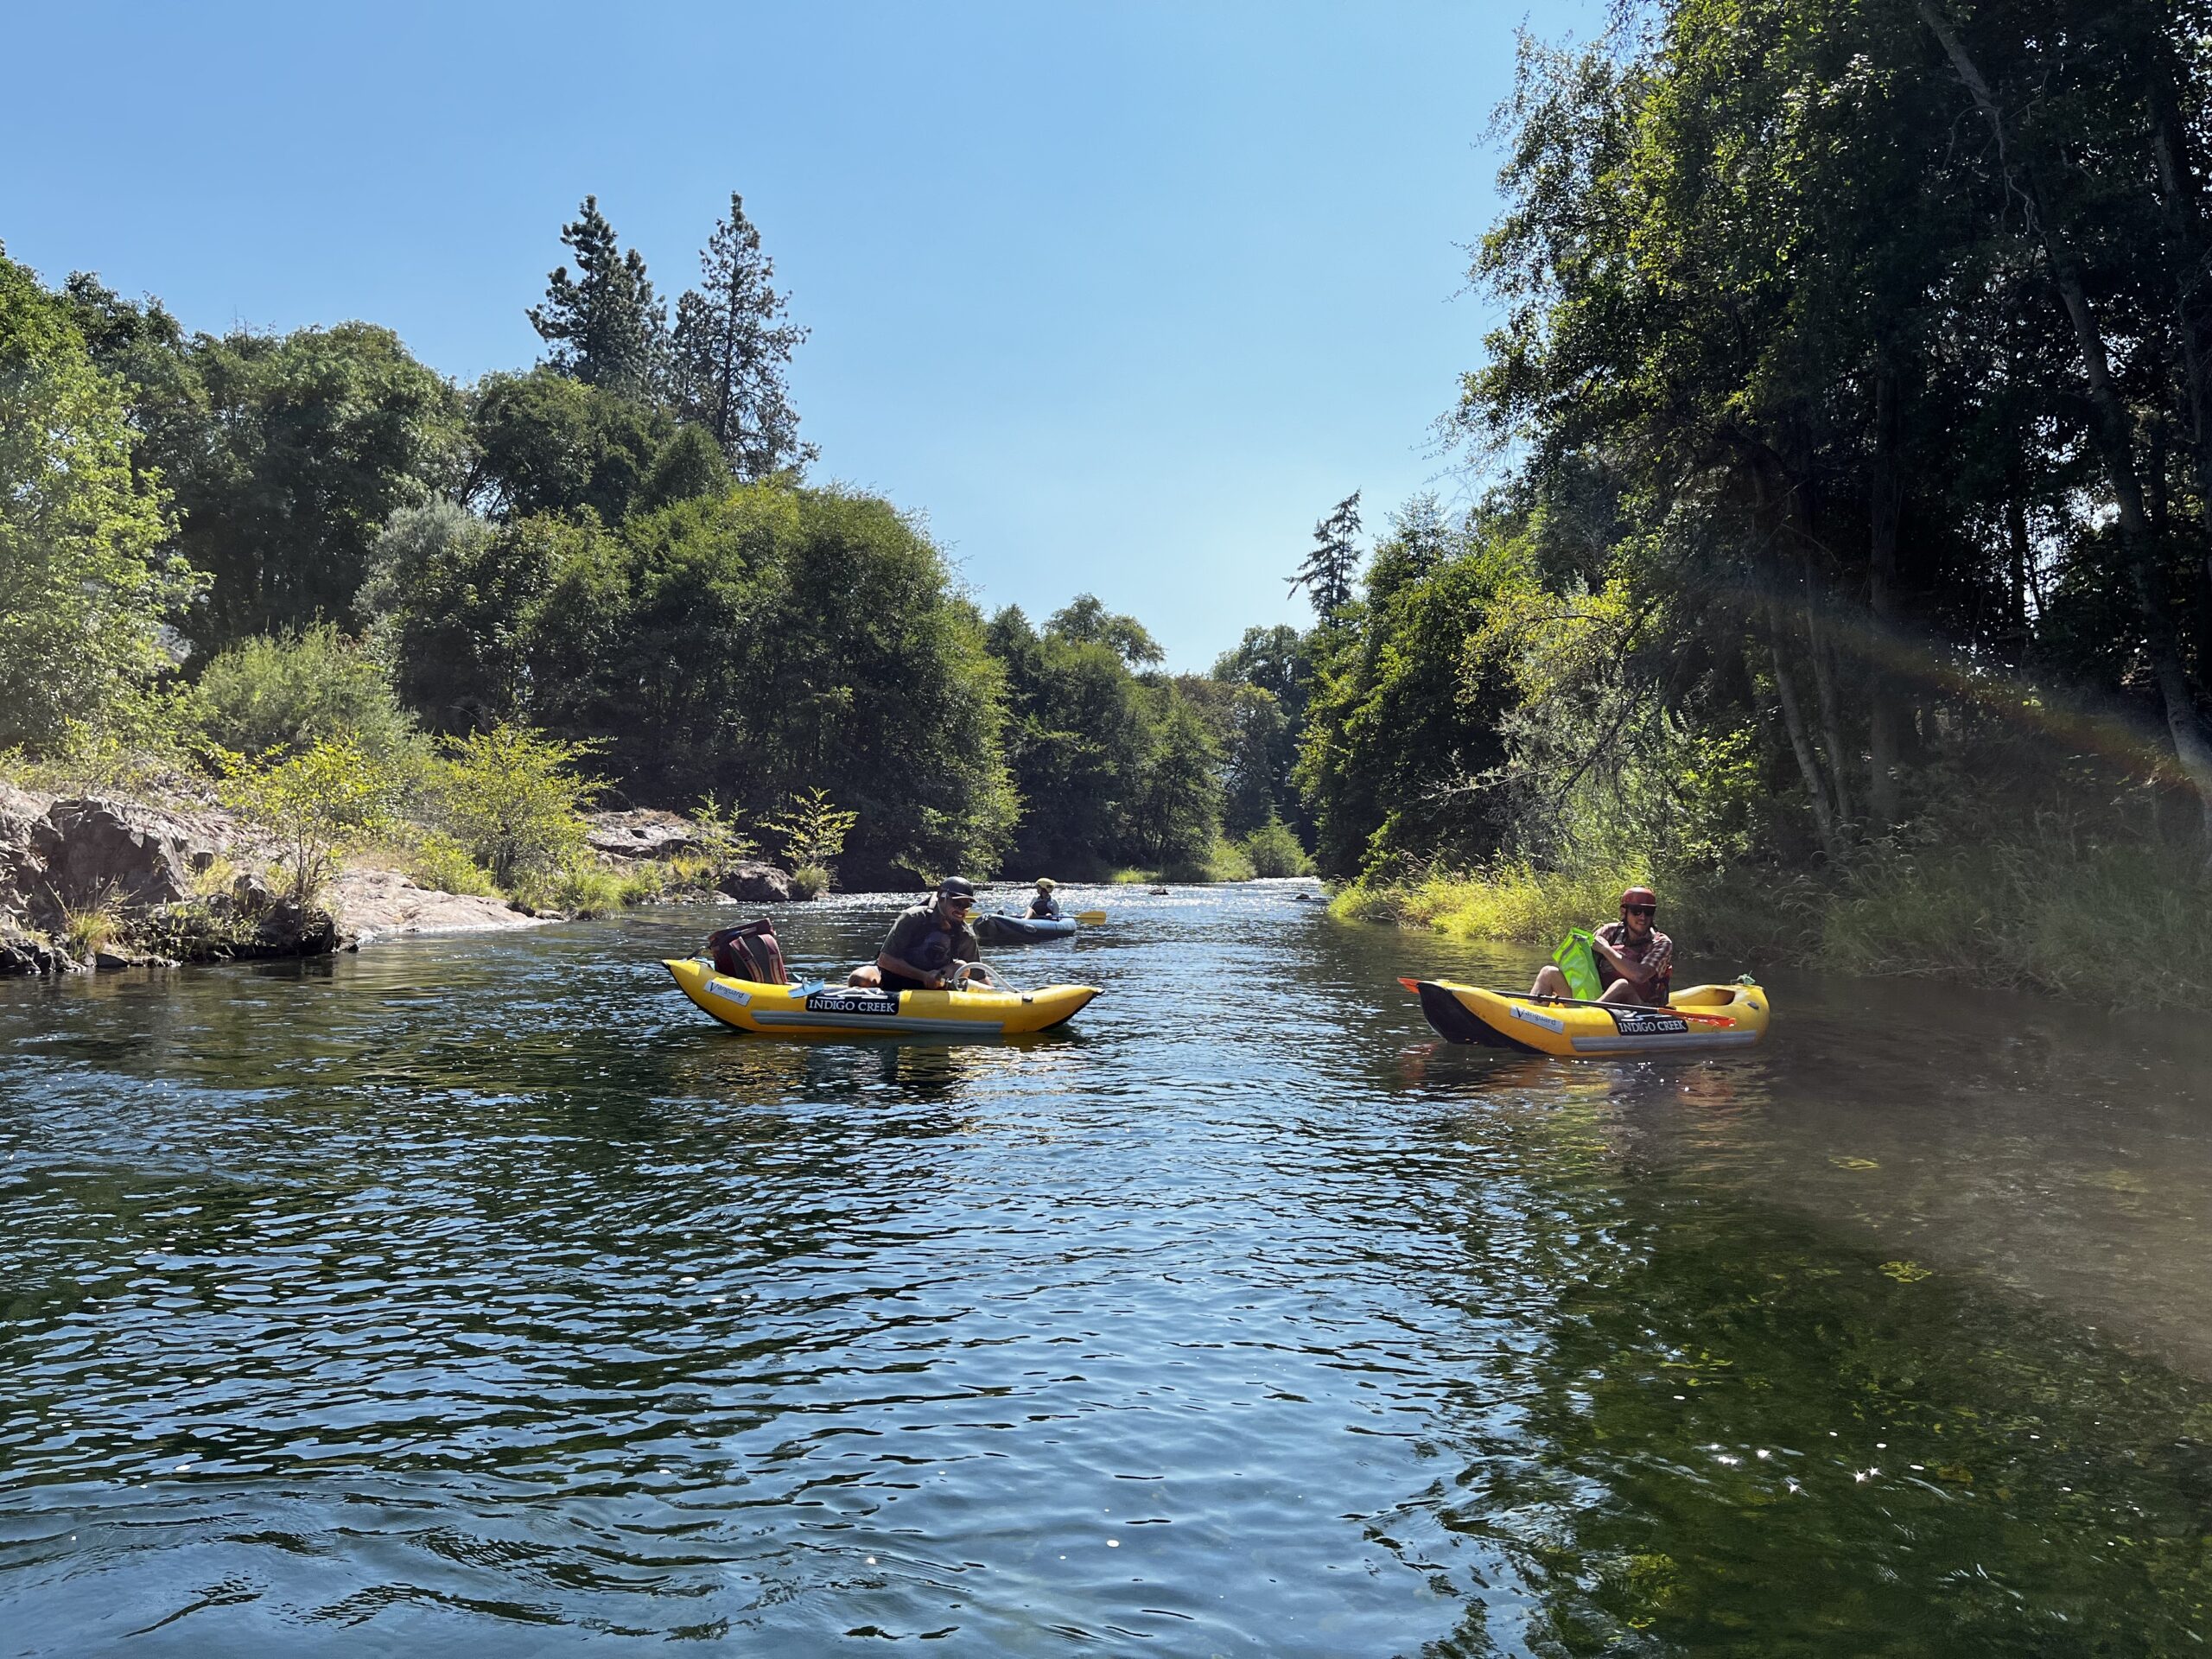 Mapping the Applegate River